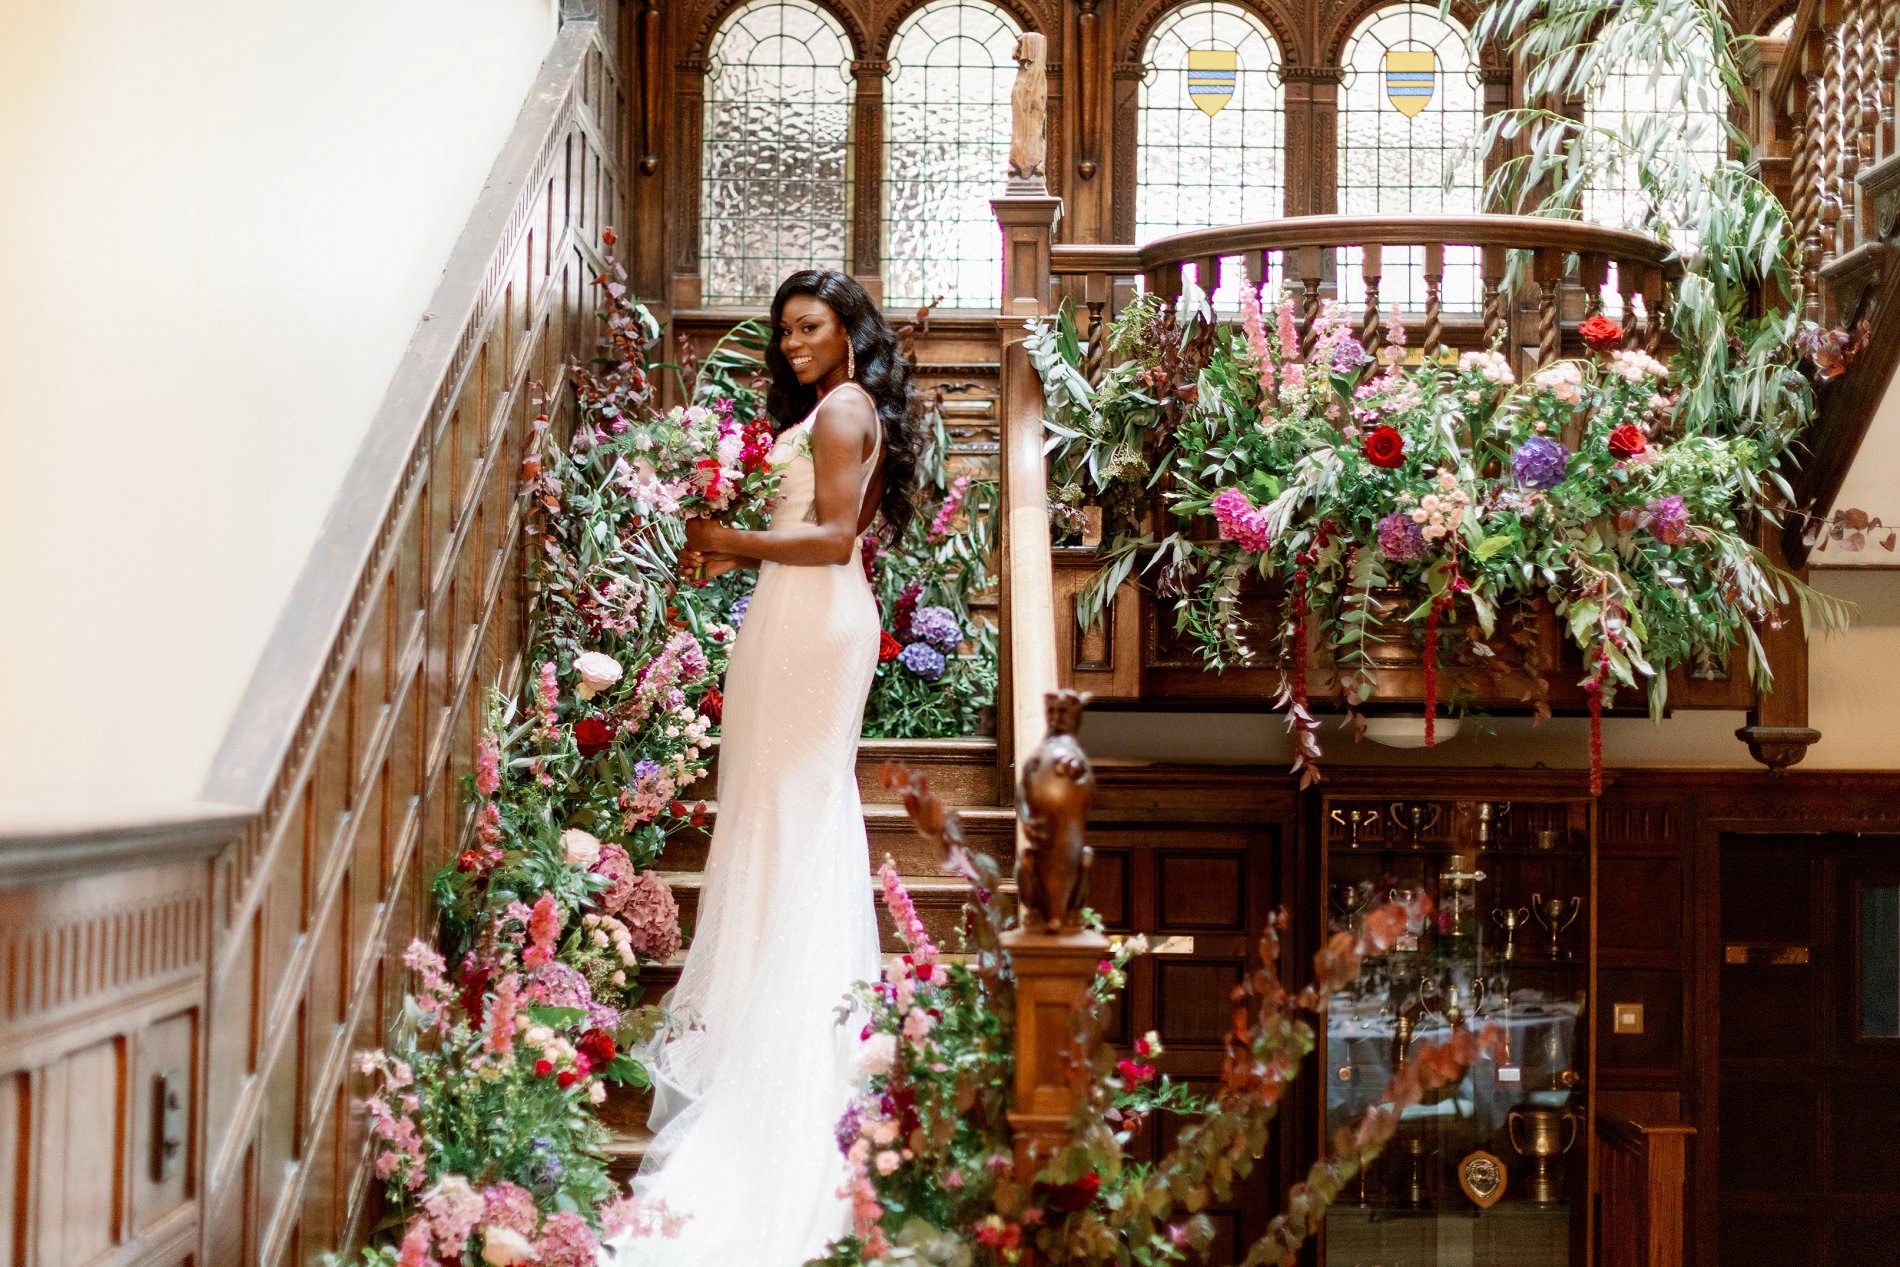 Forever Yours Styled Shoot (c) Camilla J. Hards and Courtney Dee Photography (25)